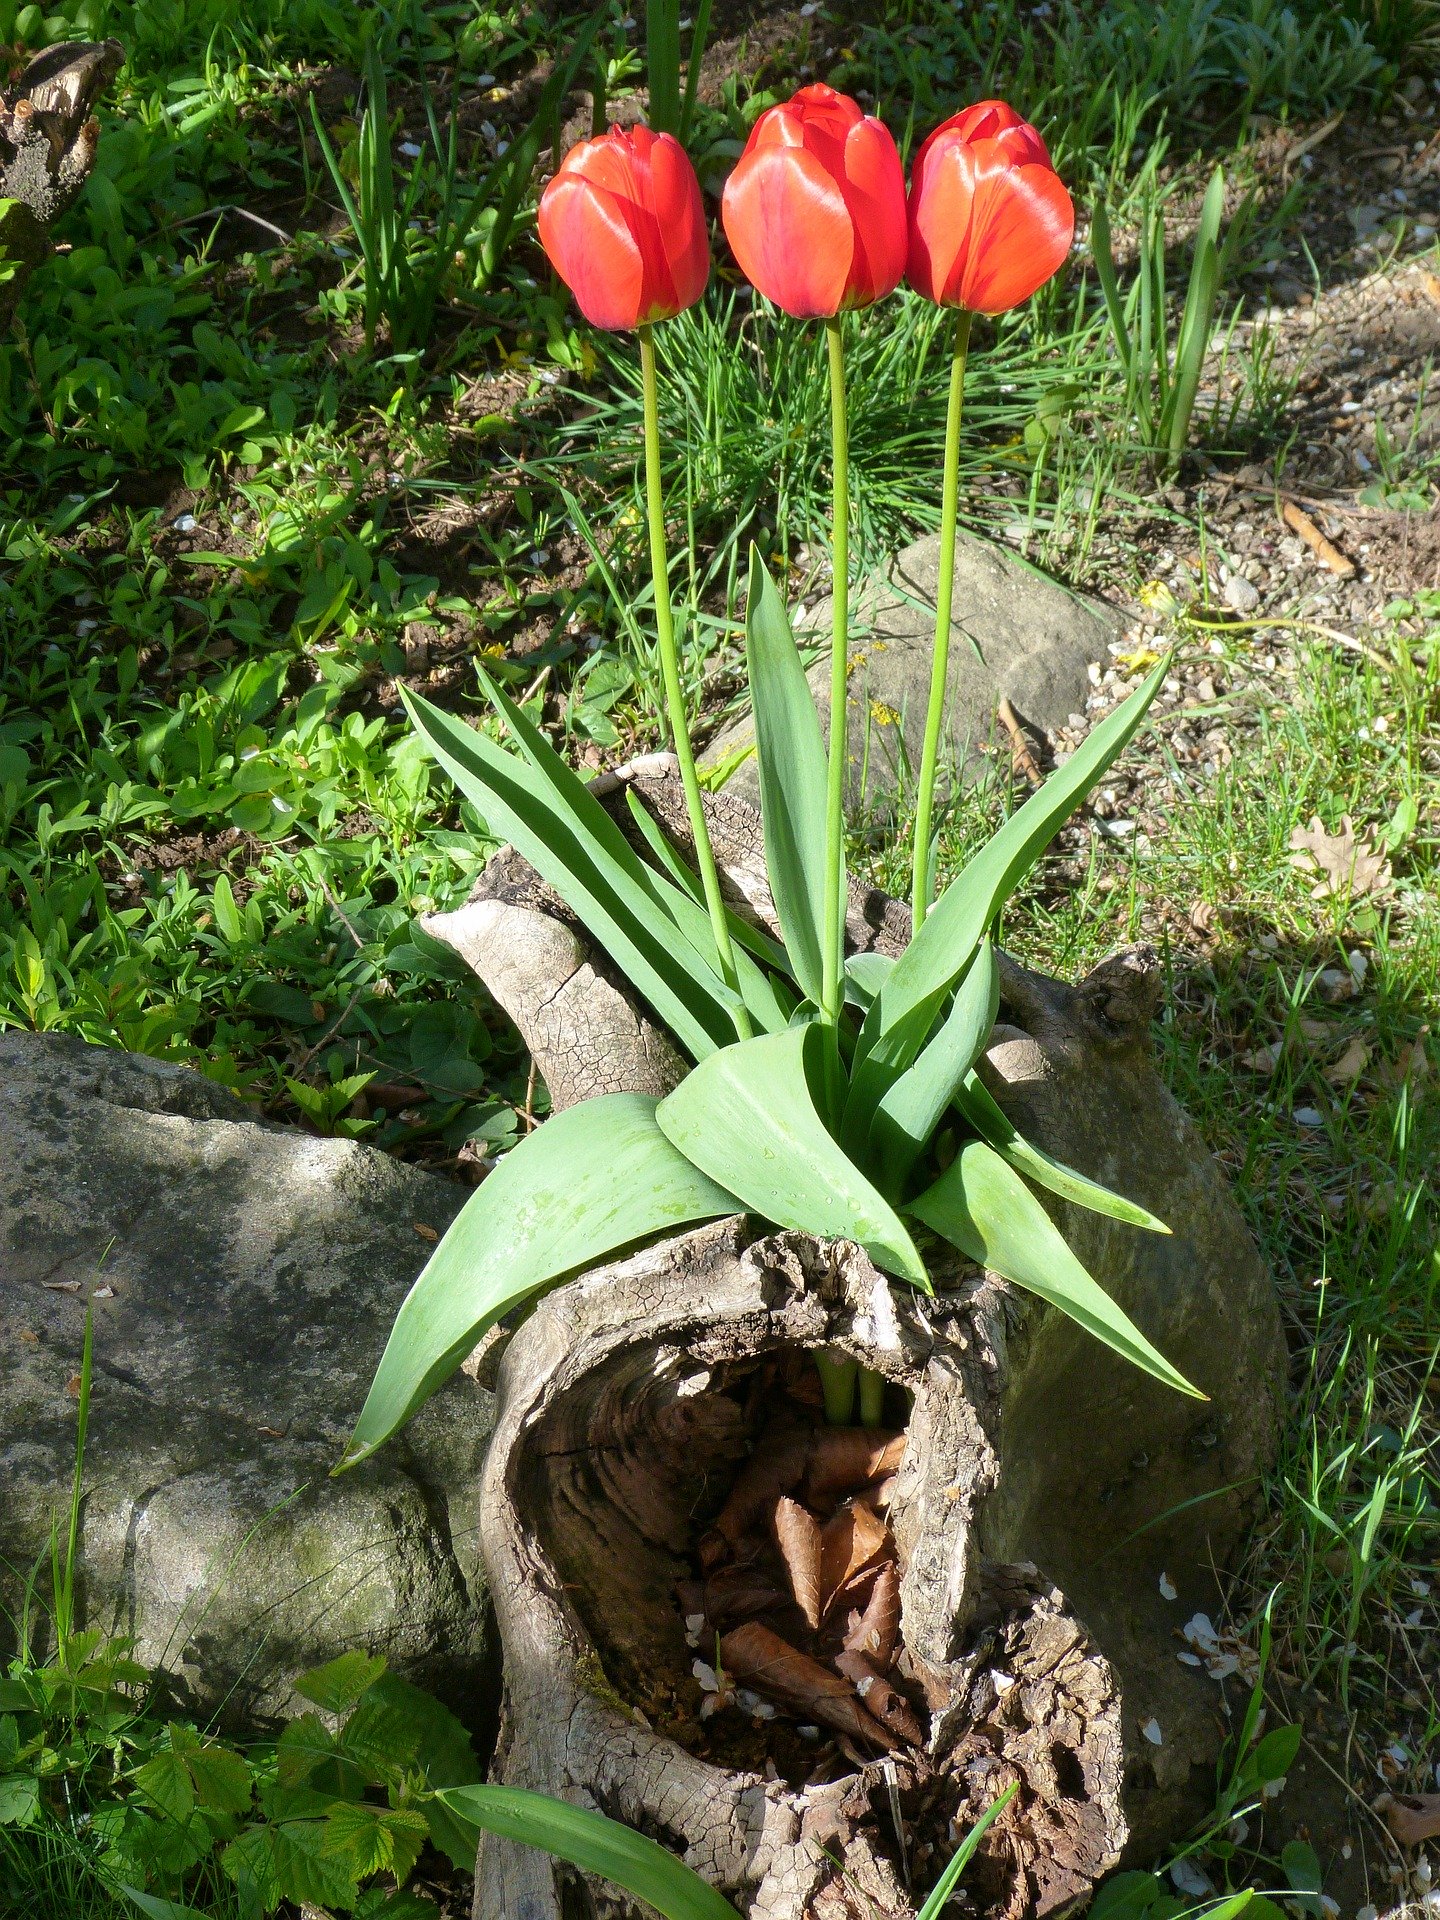 A Throuple of Red Tulips